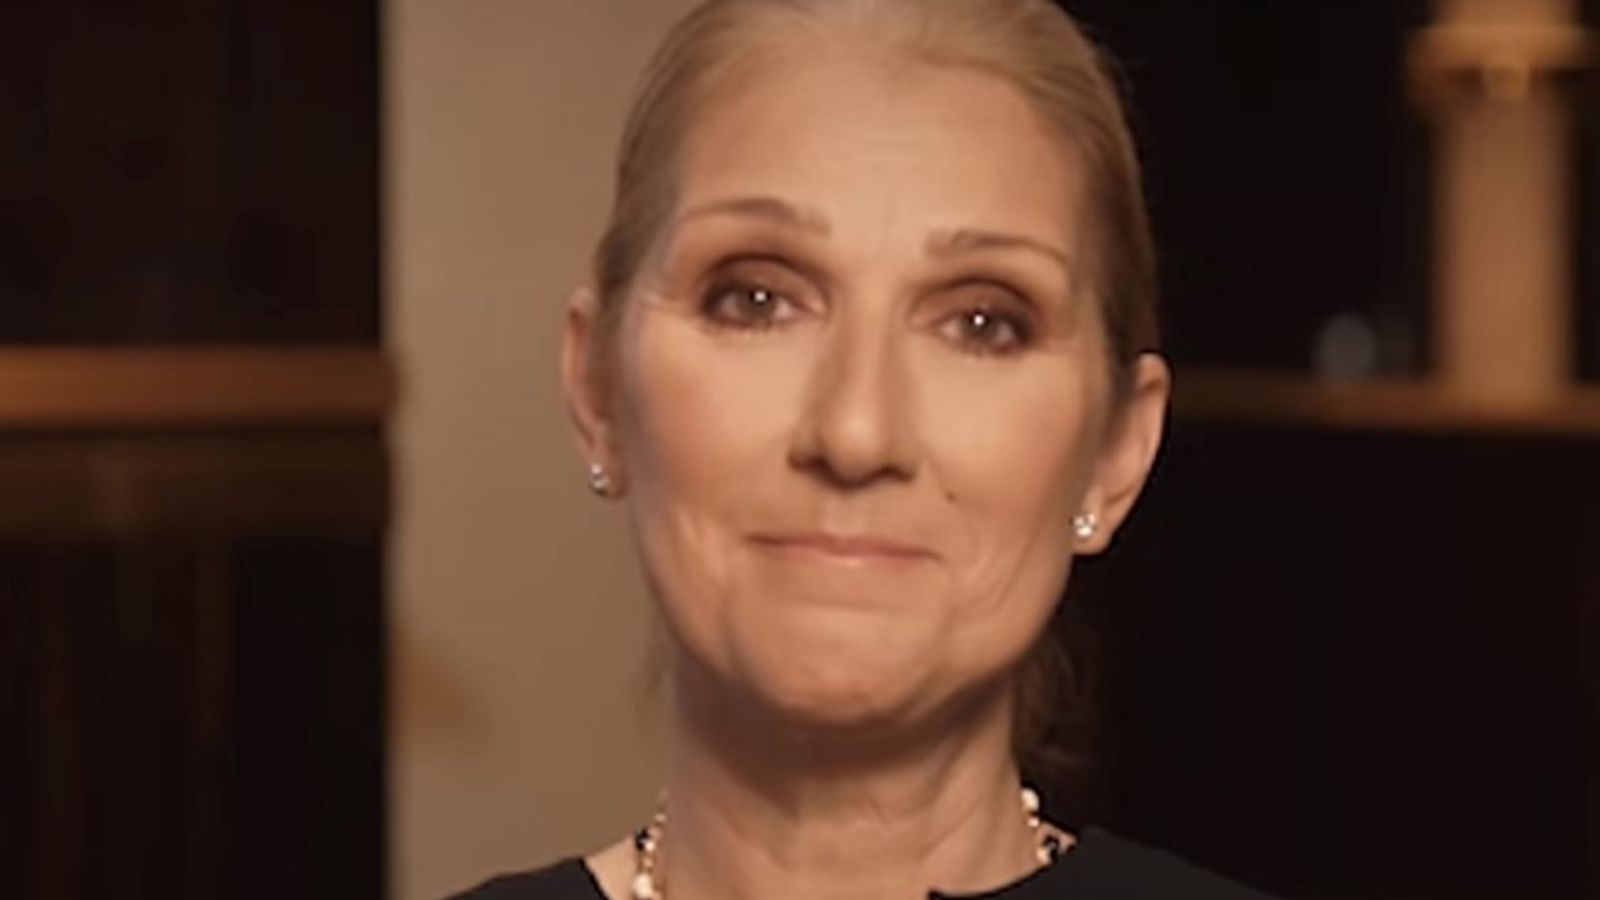 Celine Dion reveals she is suffering from 'very rare' and incurable stiff-person syndrome